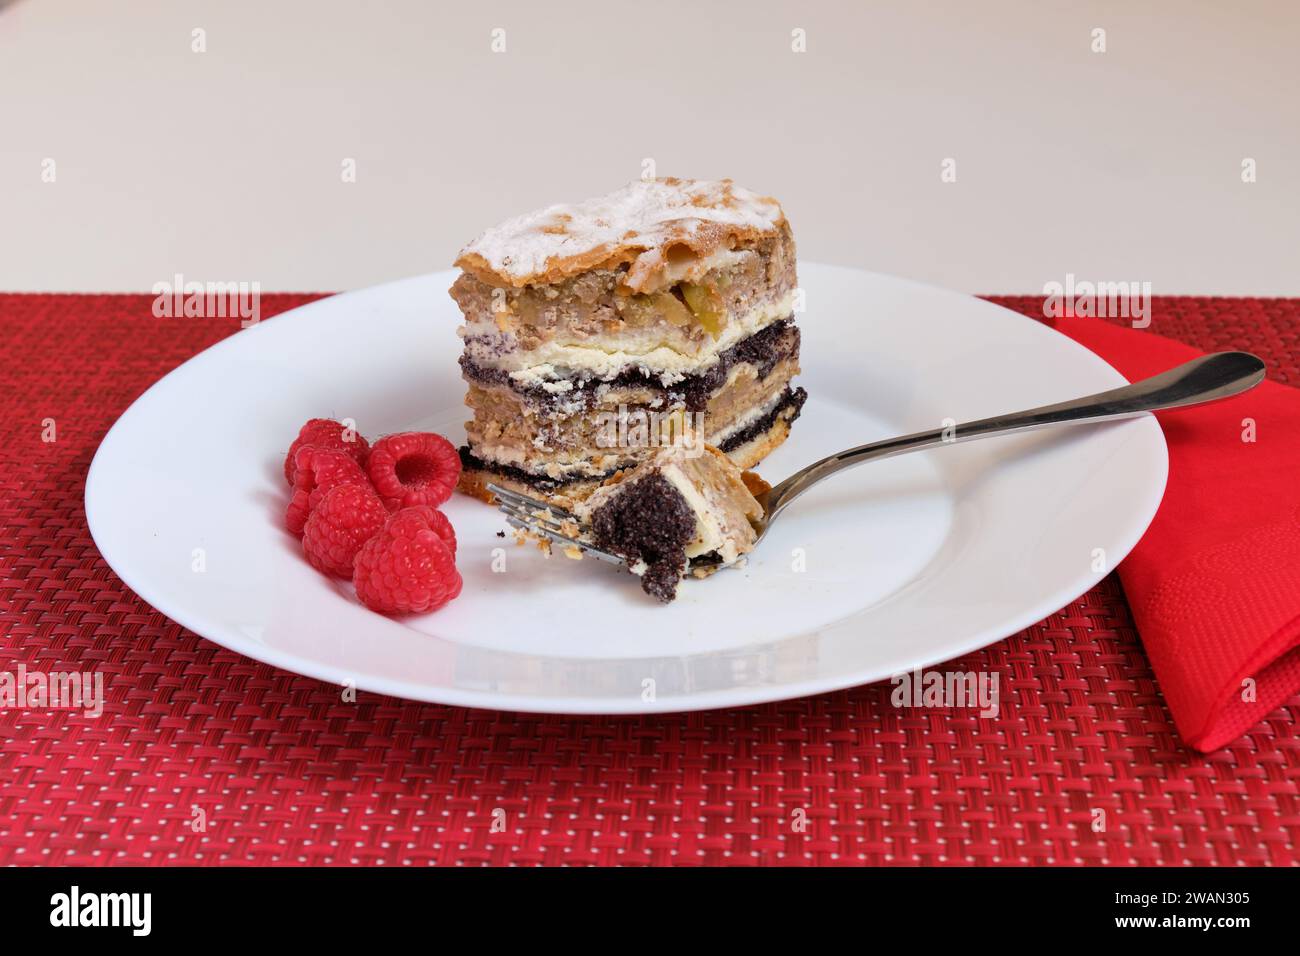 Slovenian tradional layered pastry from province of Prekmurje. (PREKMURSKA GIBANICA).  Cake sits on a white plate with fork and raspberries. Stock Photo